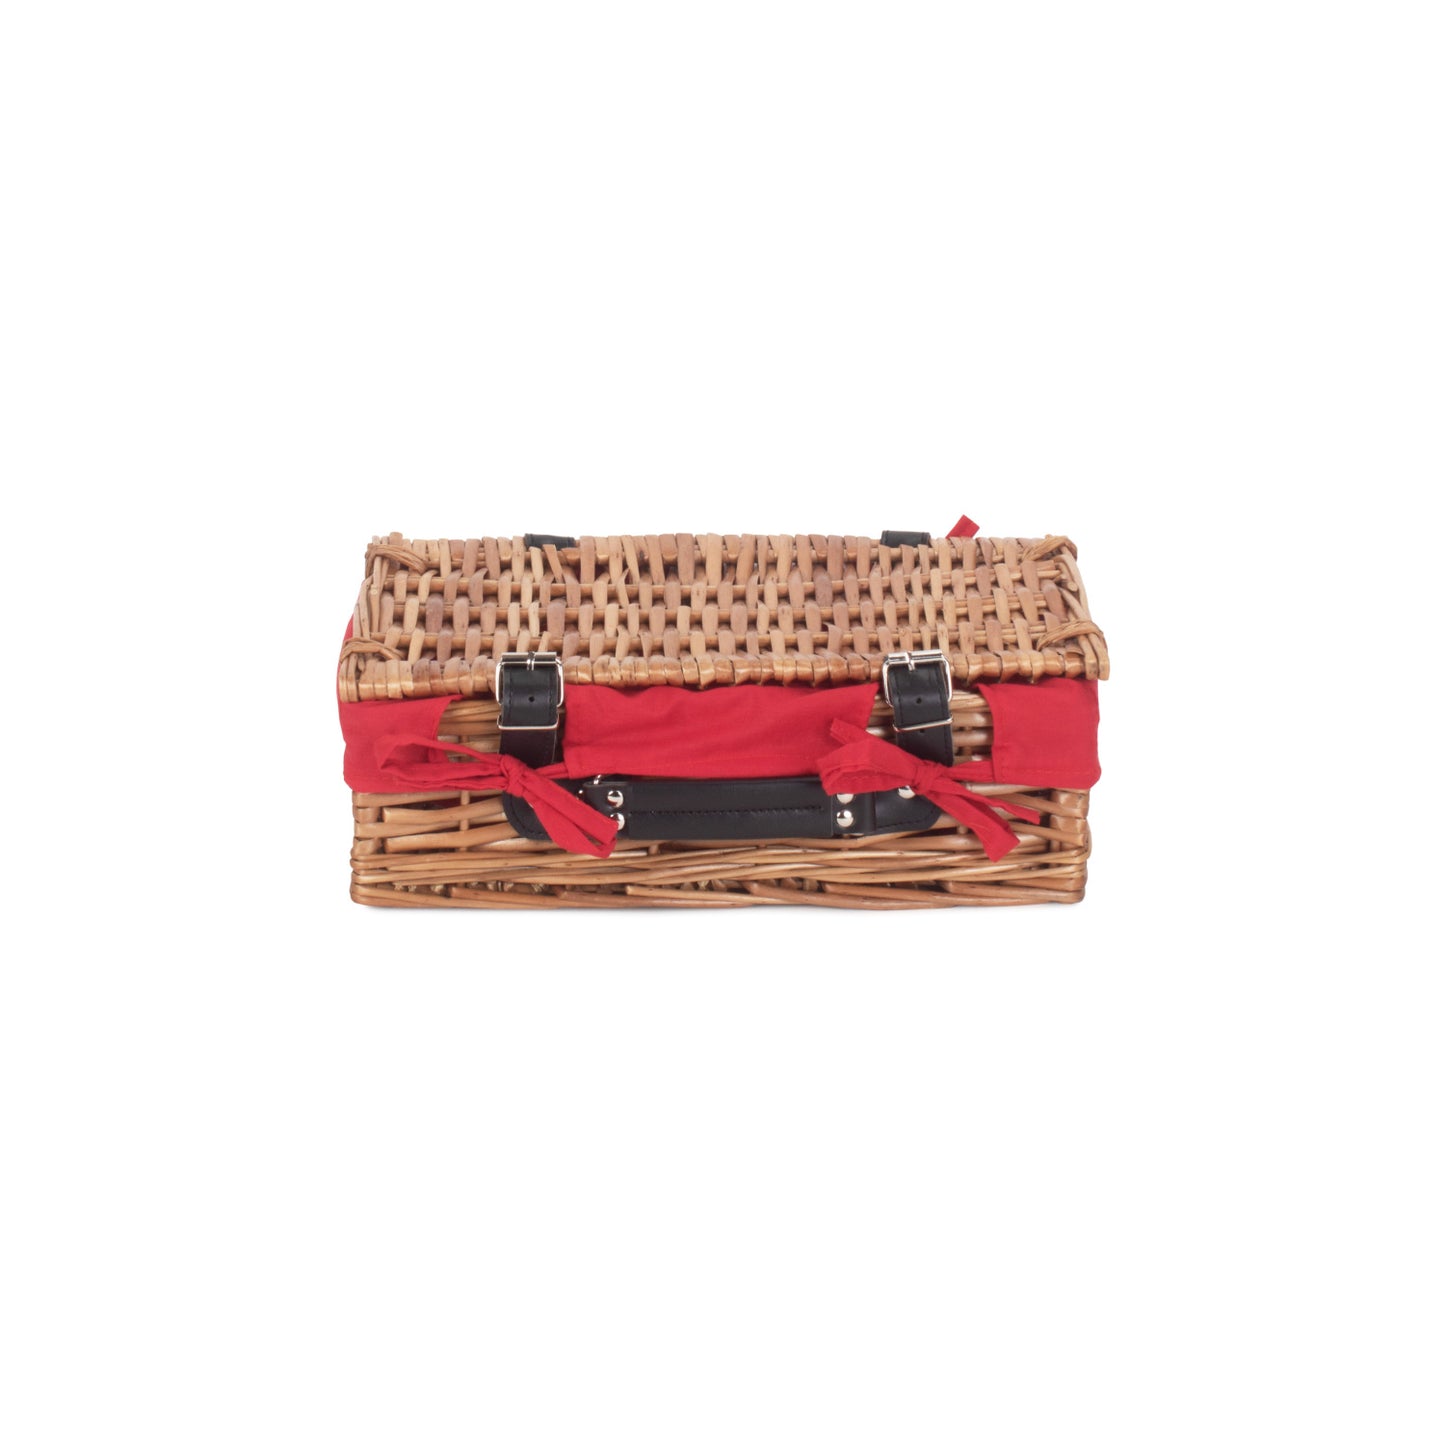 14 Inch Small Packaging Hamper With Red Lining